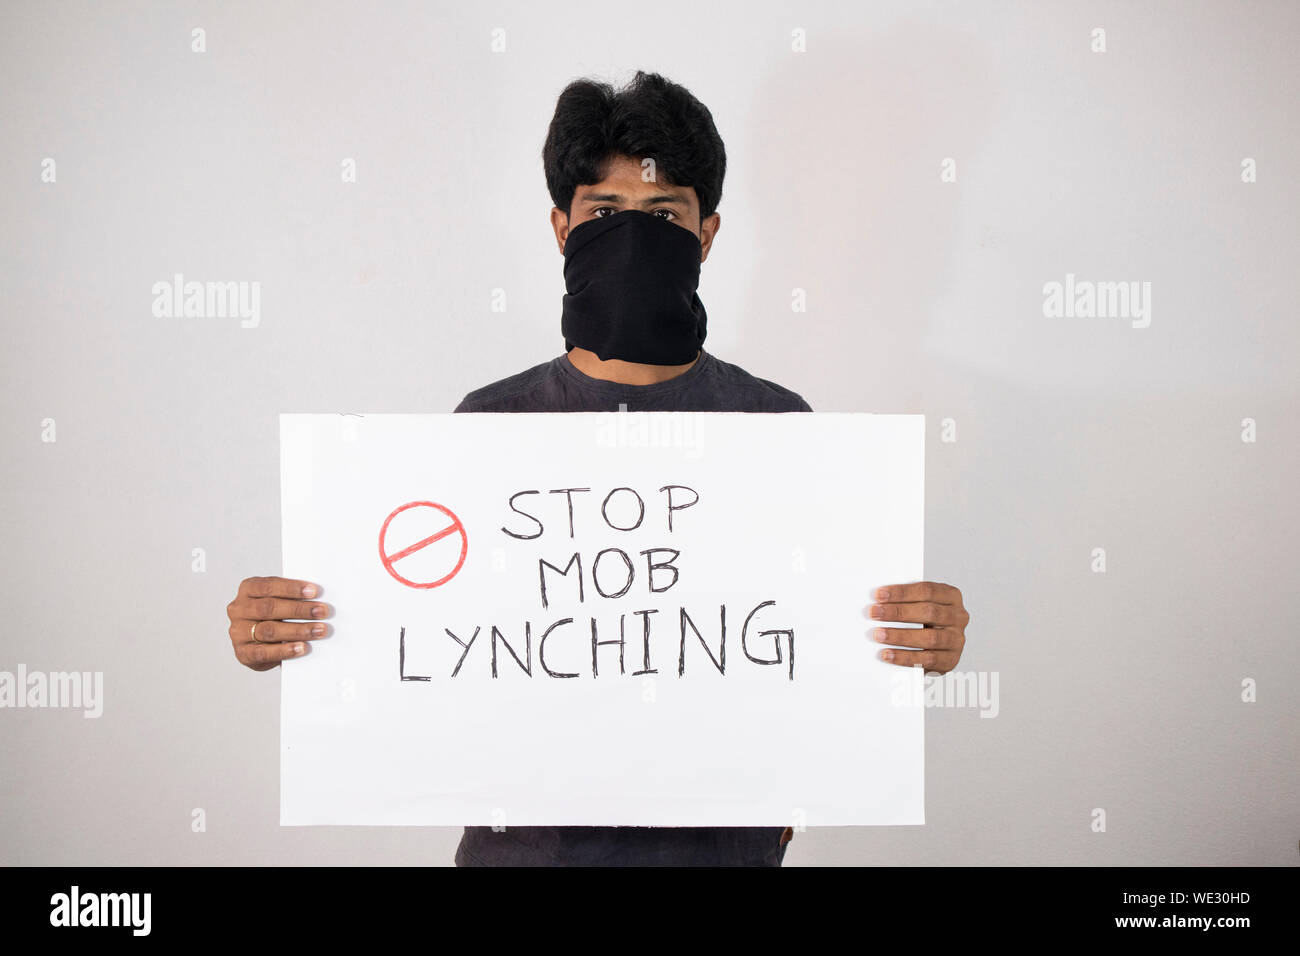 Young man protesting against the Mob lynching by holding Placard showing of Stop Mob Lynching on isolated background. Stock Photo